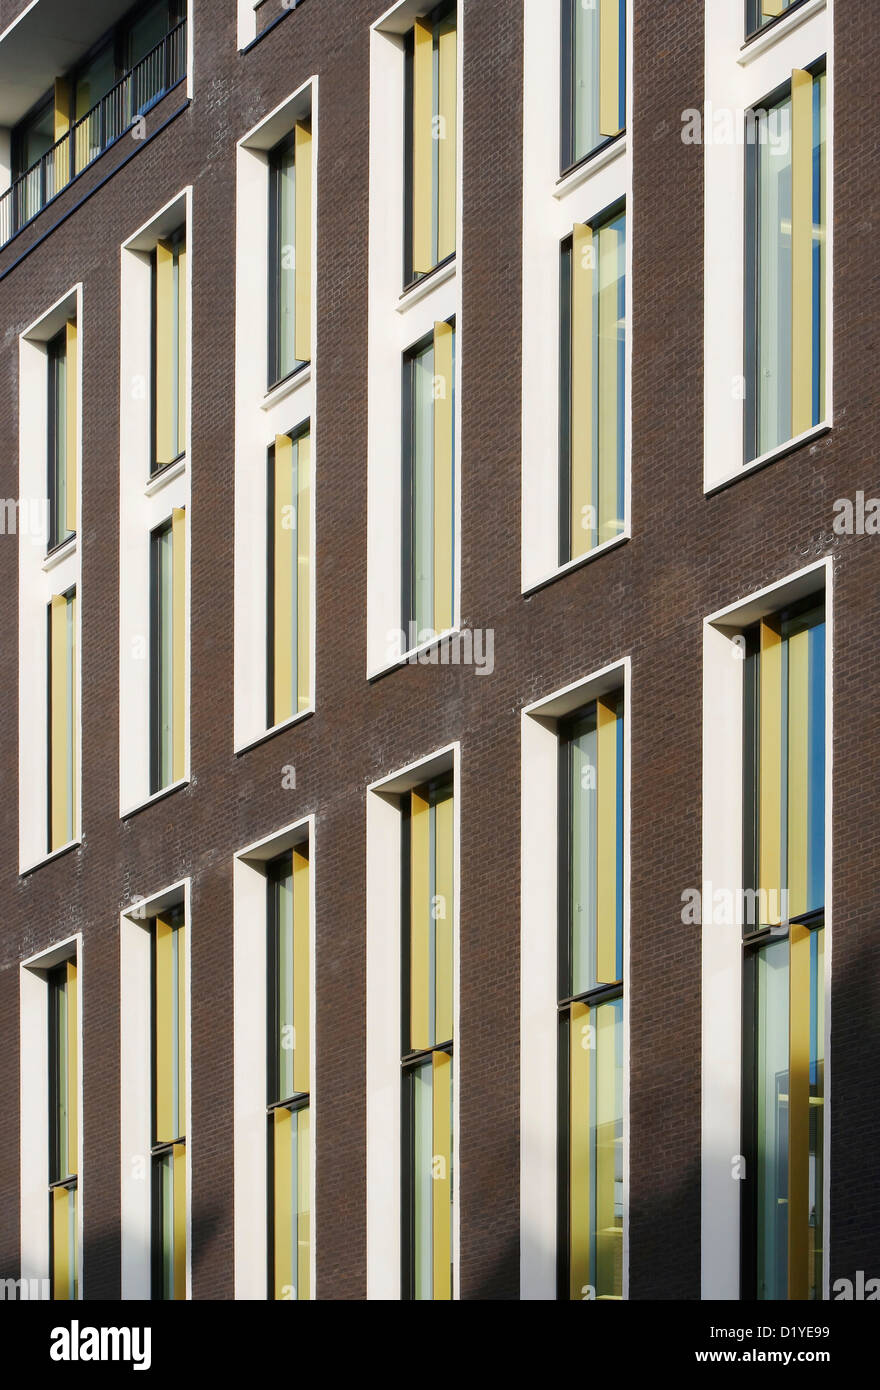 5 Hanover Square, London, United Kingdom. Architect: Squire and Partners, 2012. Detailed brick facade with window reveals. Stock Photo